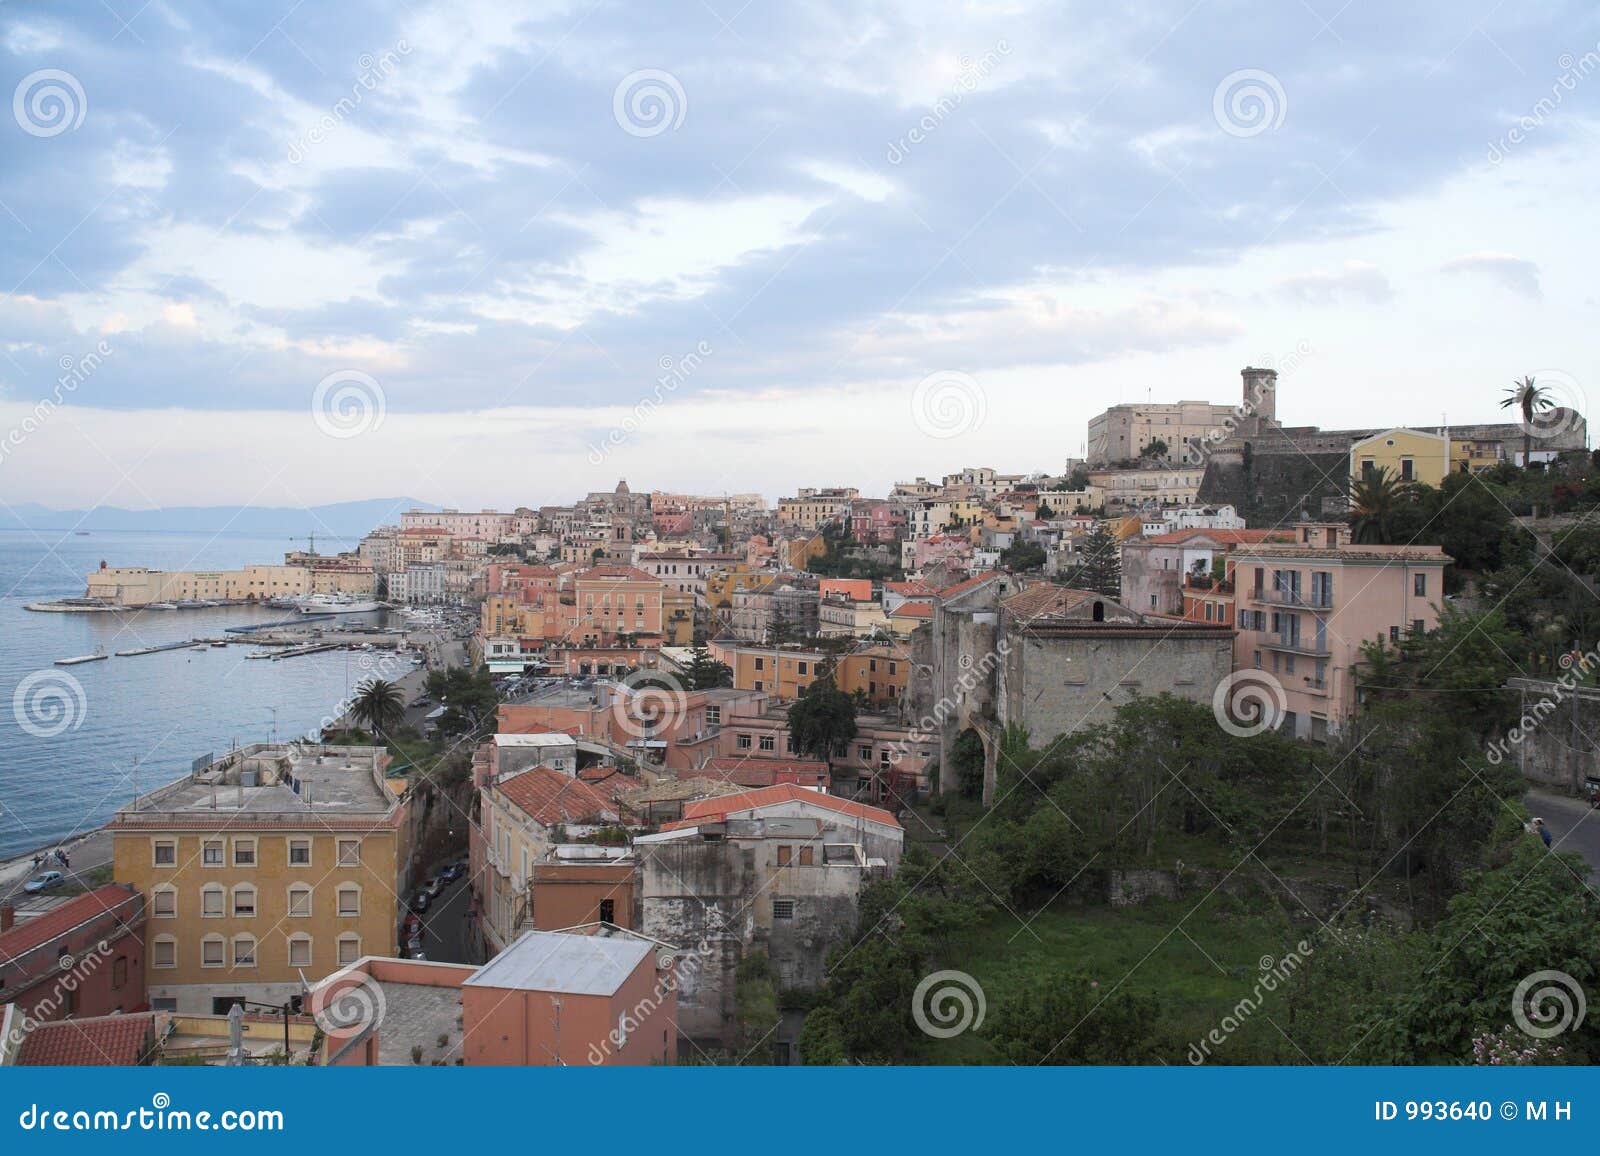 italy - gaeta - historical city and harbour